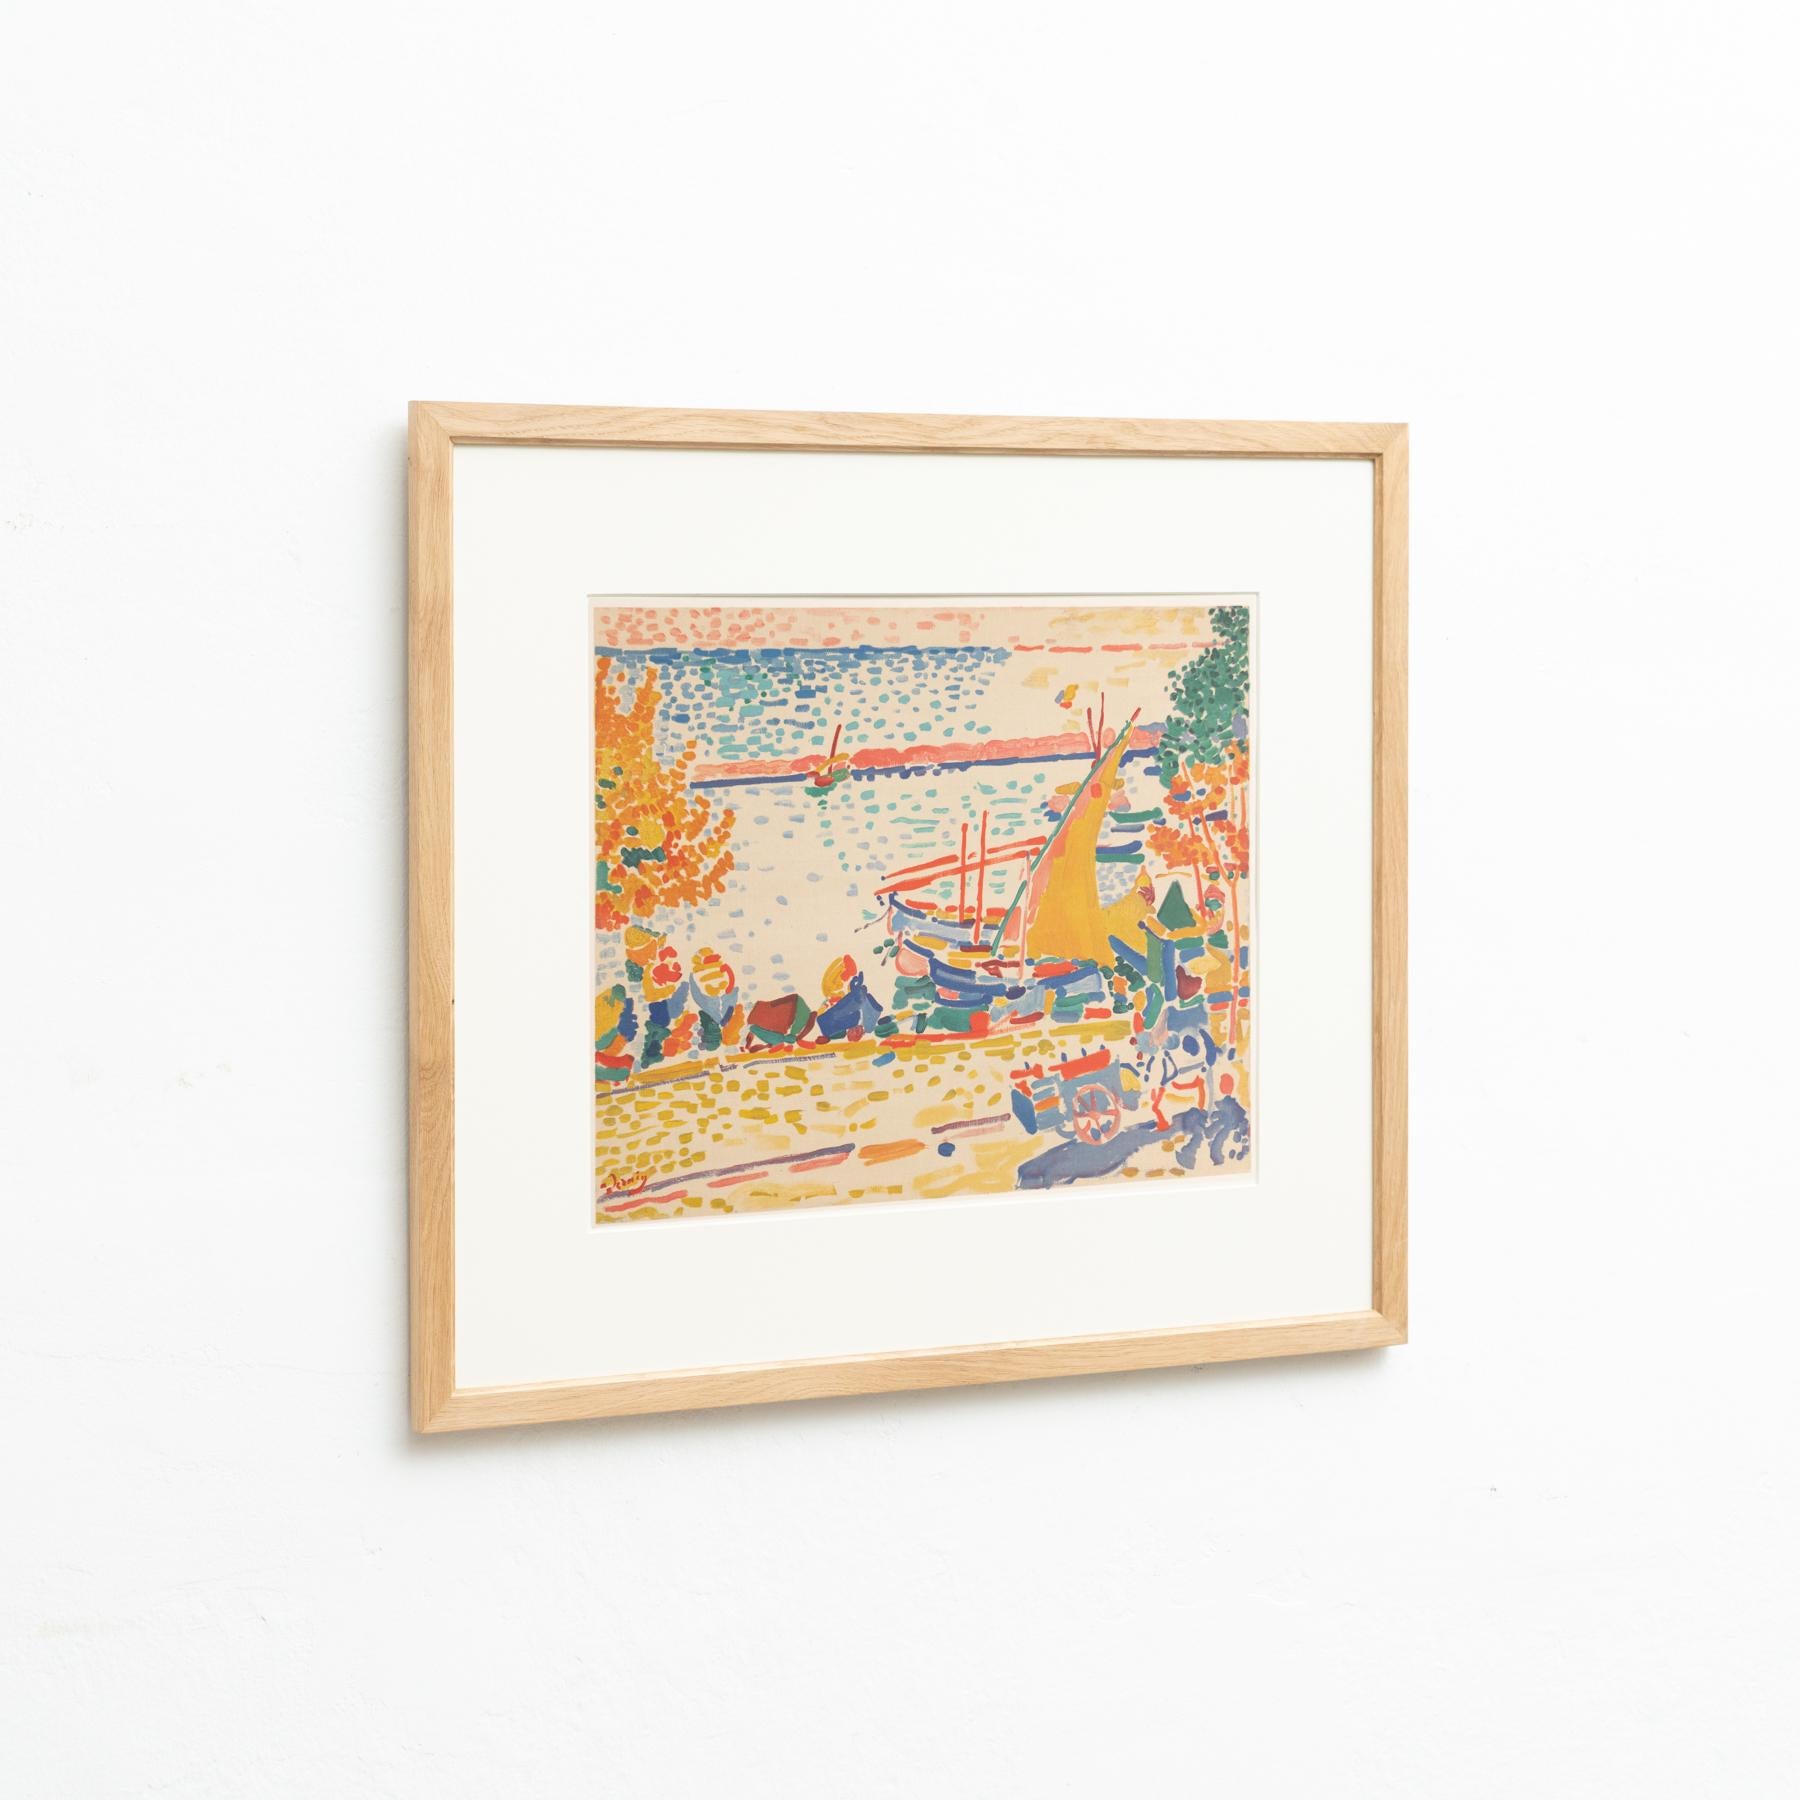 Original 'Hyde Park' color lithograph by André Derain.

Lithograph printed from an original painting made by the author in France in 1906.

Published by Fernand Mourlot in Les Fauves. Paris, circa 1972. 

Framed and signed in the